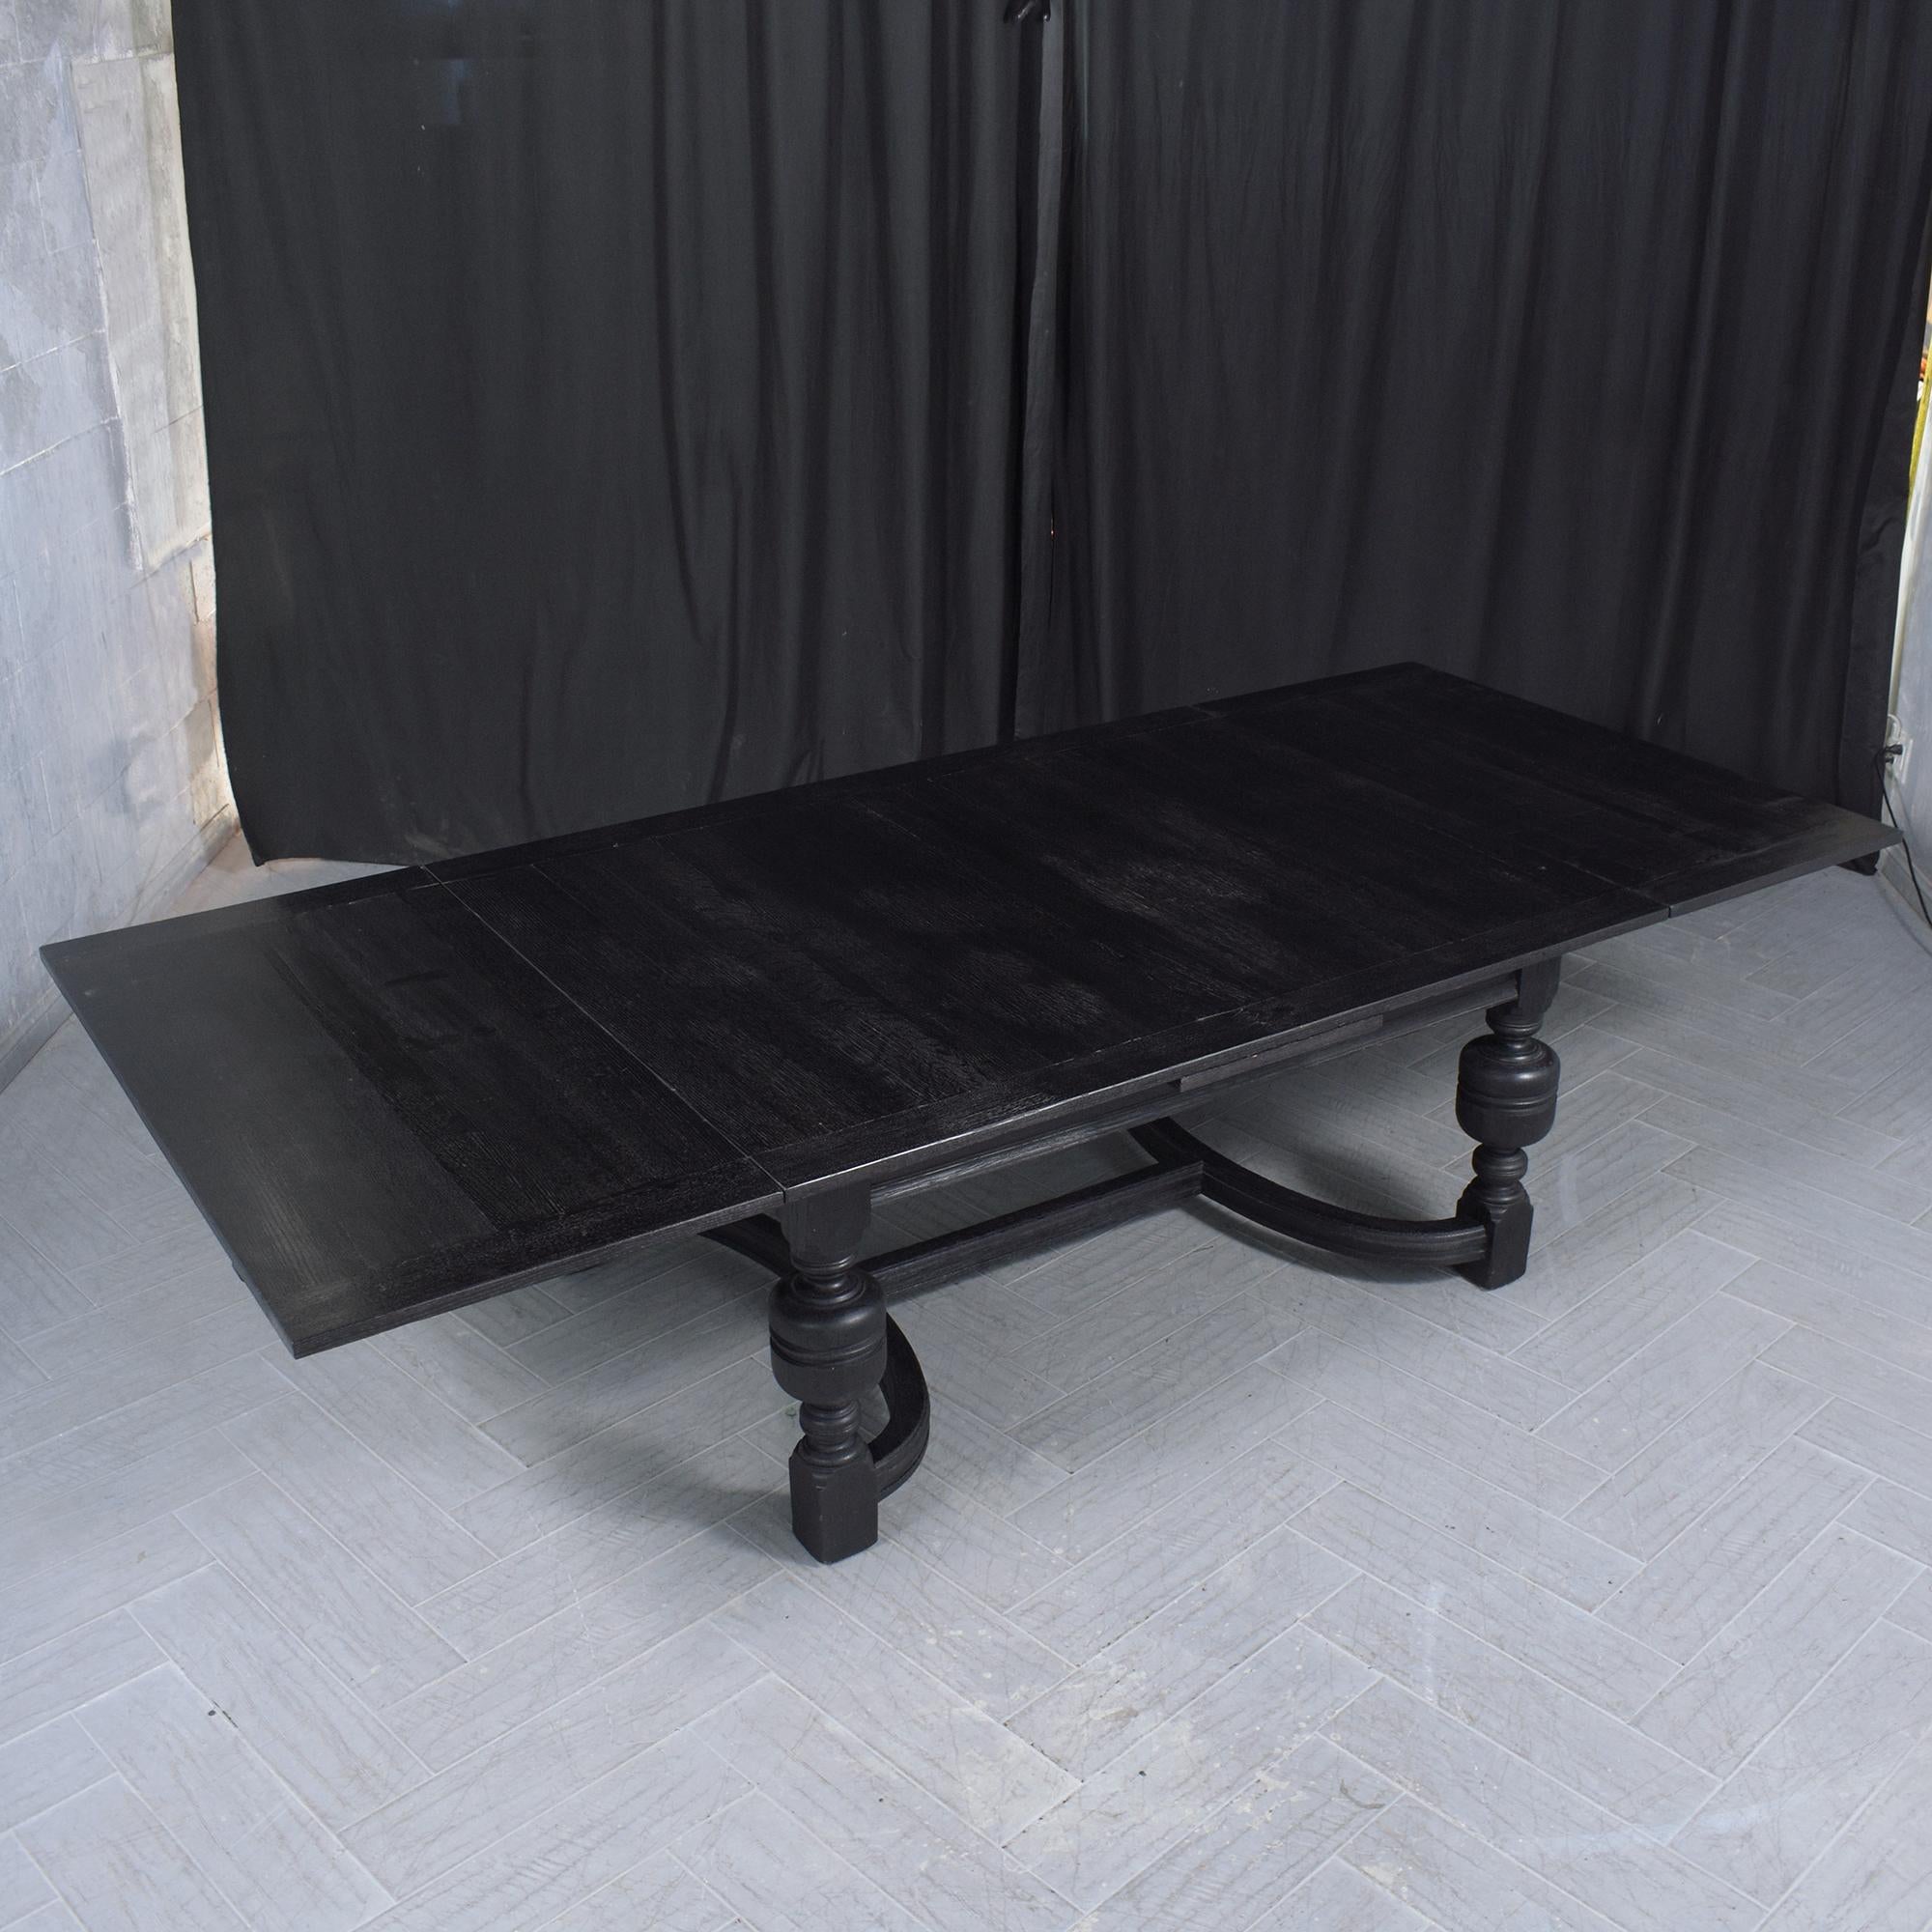 1850s Spanish Extendable Dining Table: Ebonized Solid Wood with French Design For Sale 2